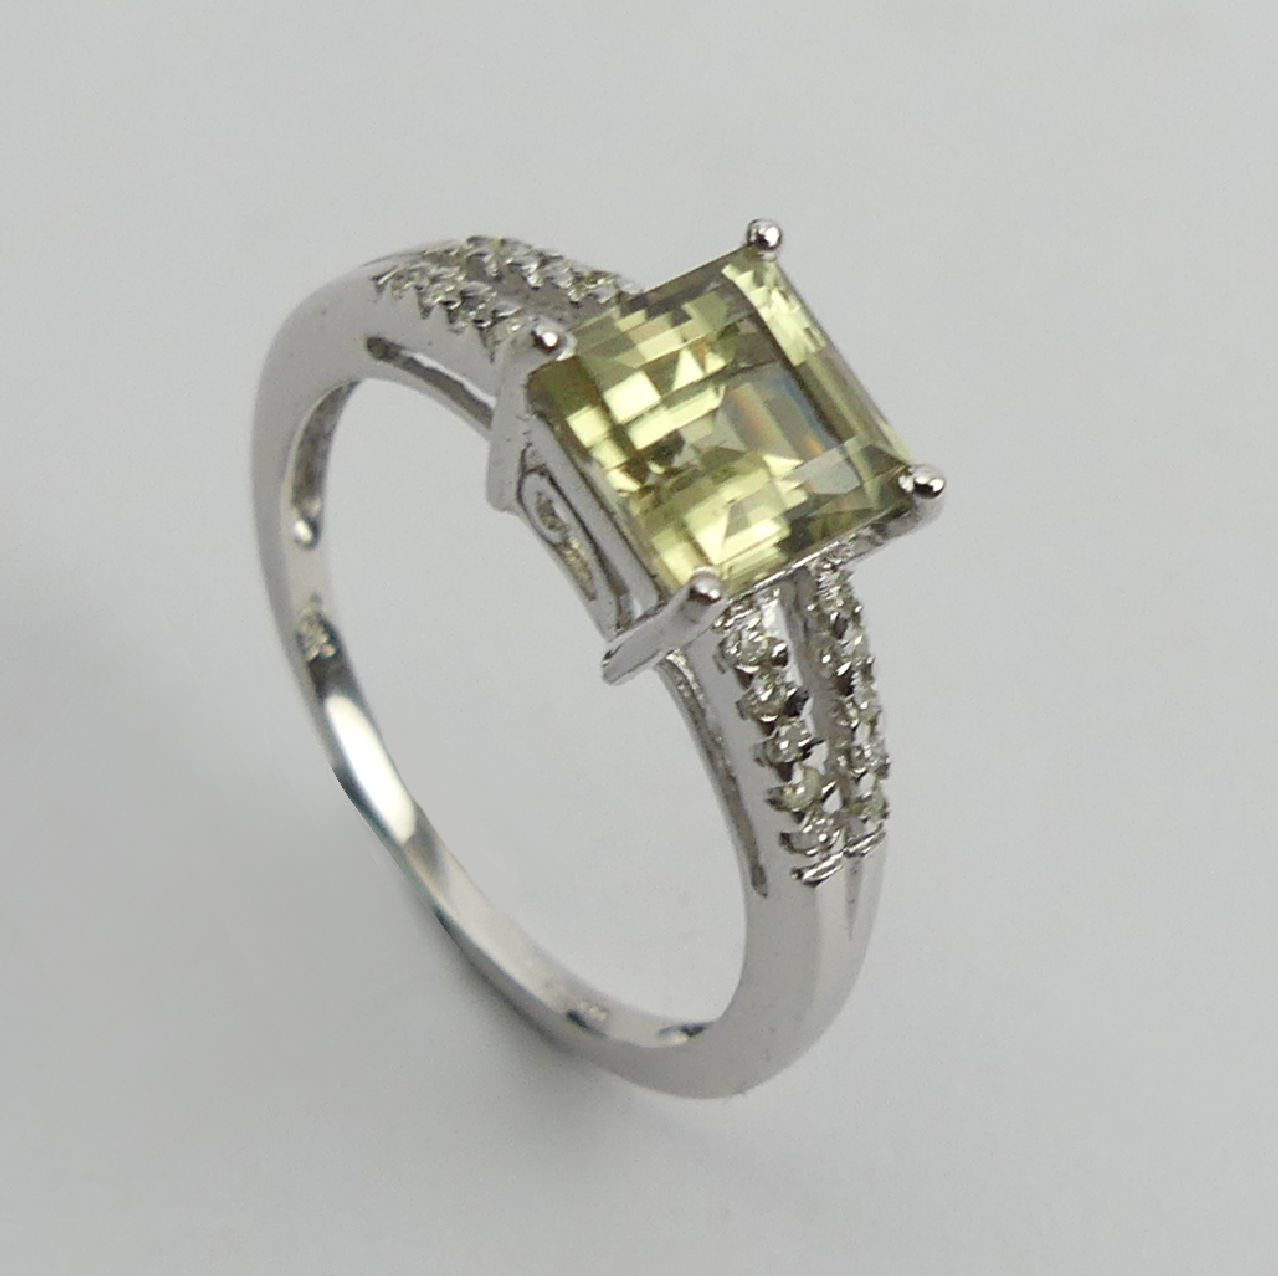 18ct white gold, square cut, zultanite and diamond ring, 2.8grams, 7.3mm, Size N1/2. UK Postage £12.